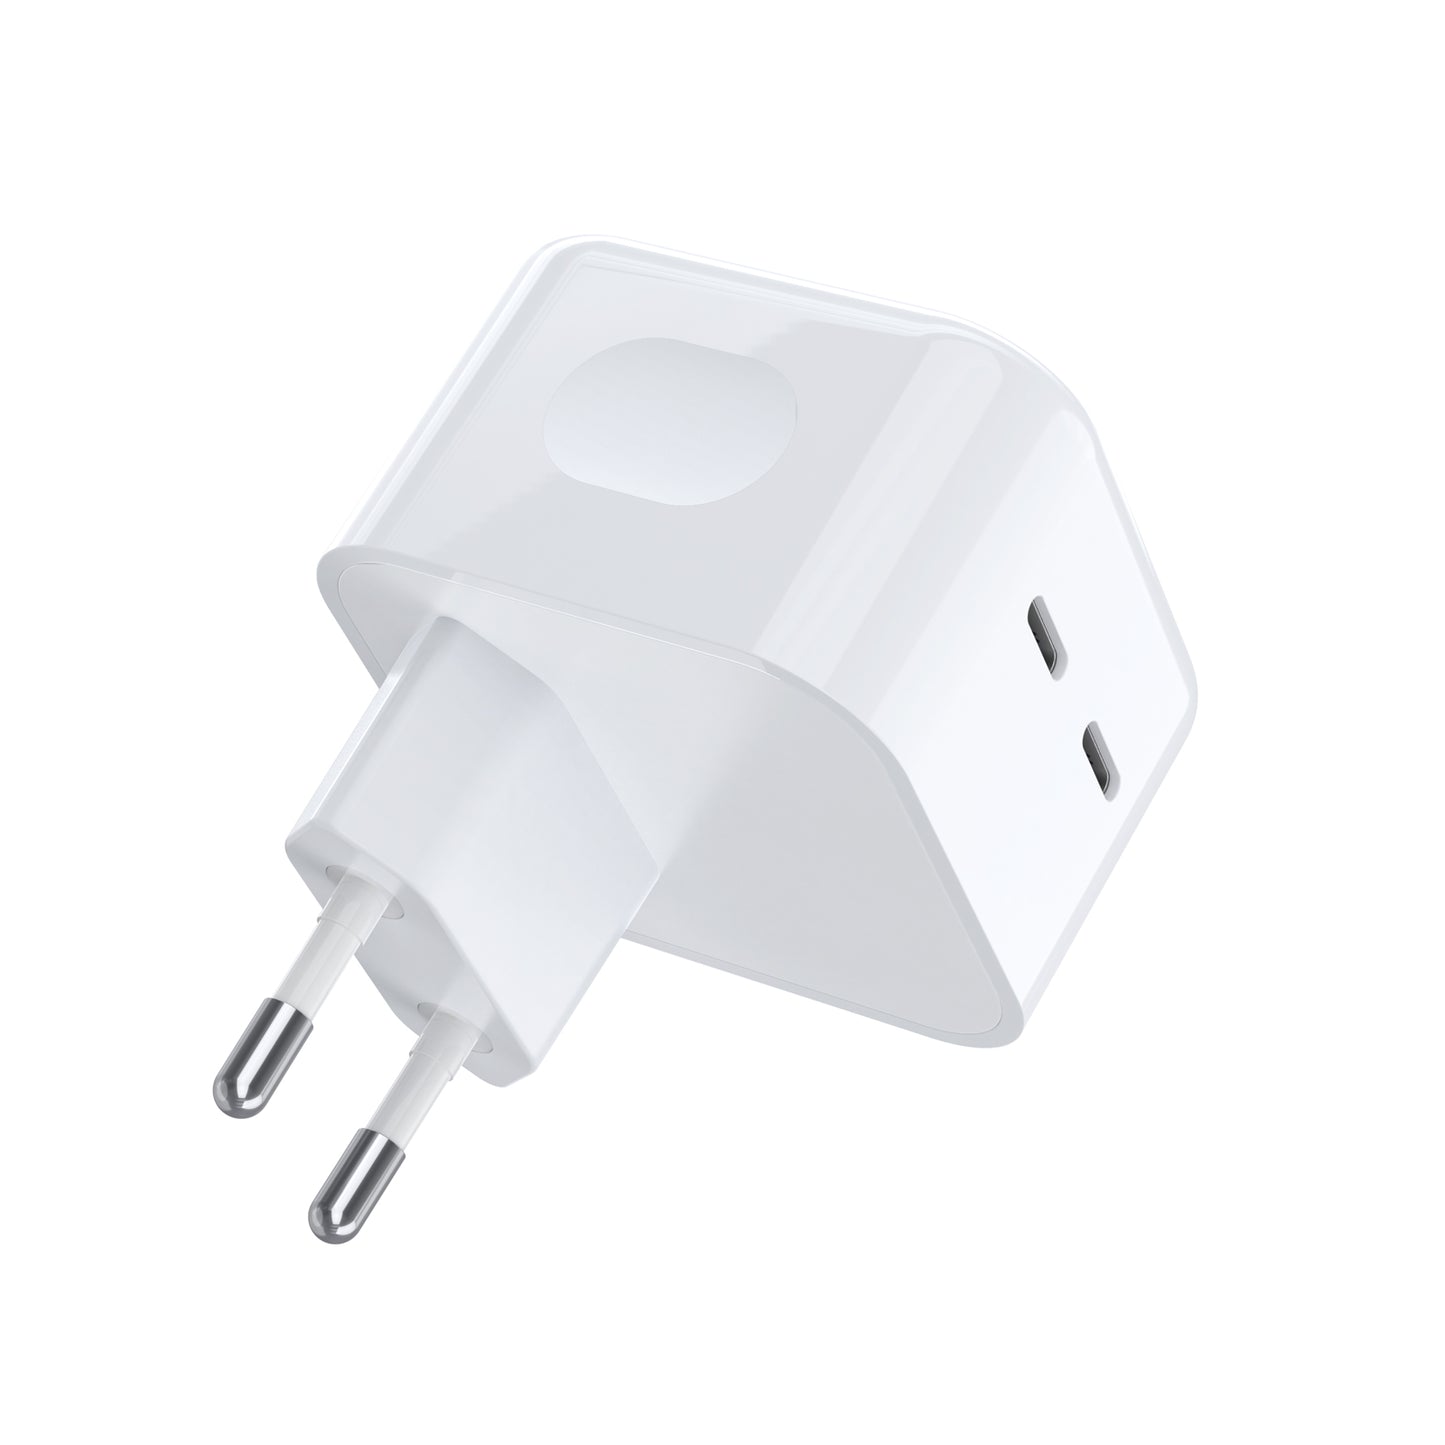 Pulse PD35W wall charger - Indian pin – Imagine Online